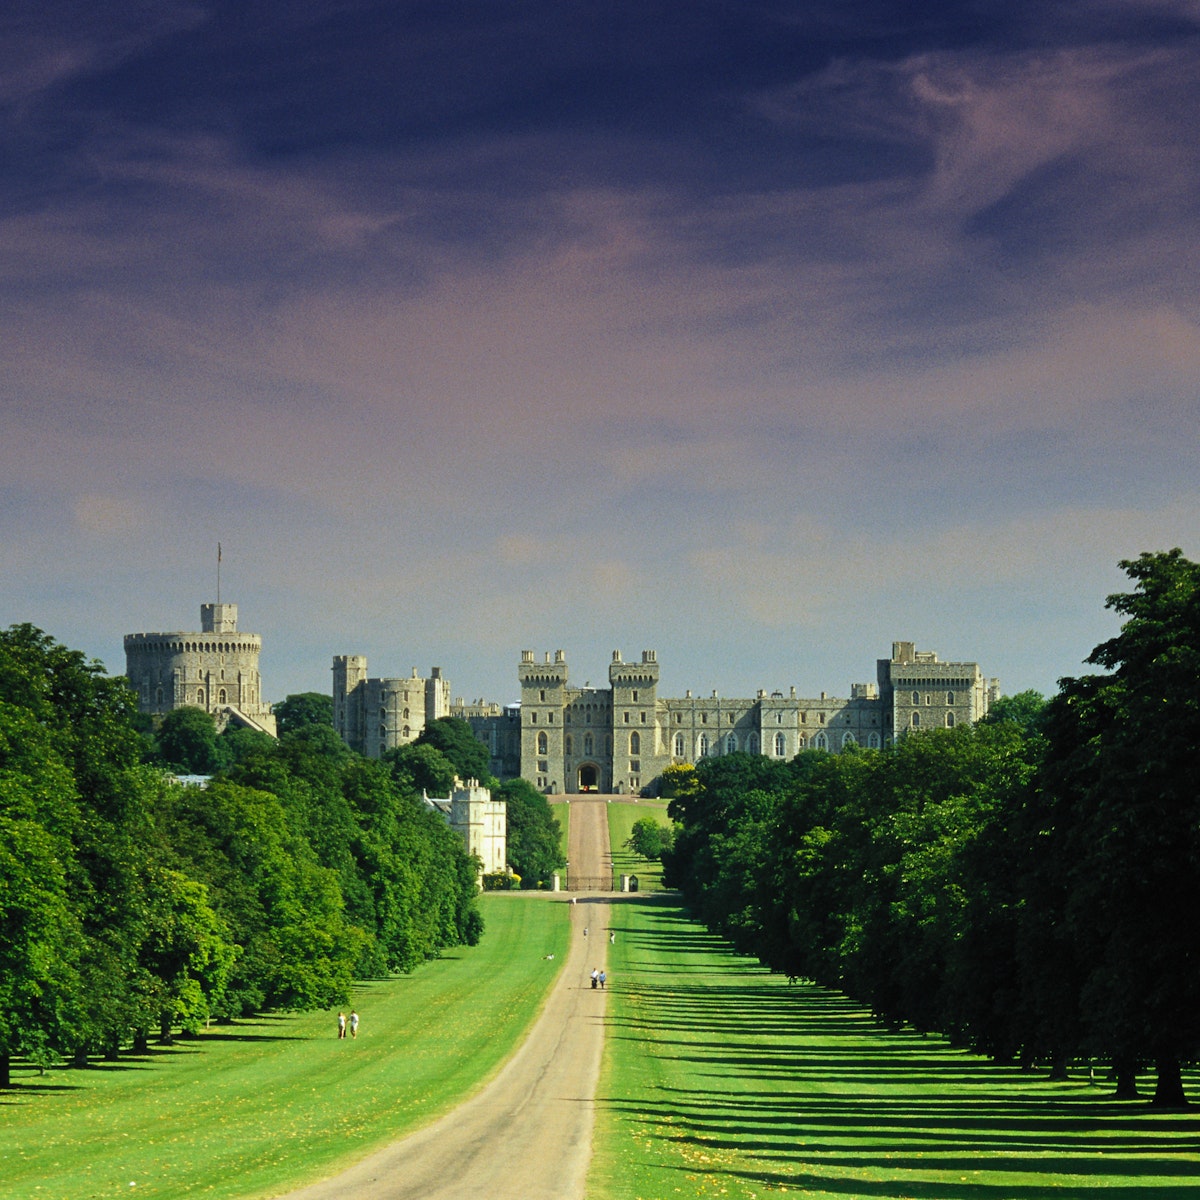 The Long Walk, the pathway leading to Windsor Castle is 2 1/2 miles long.